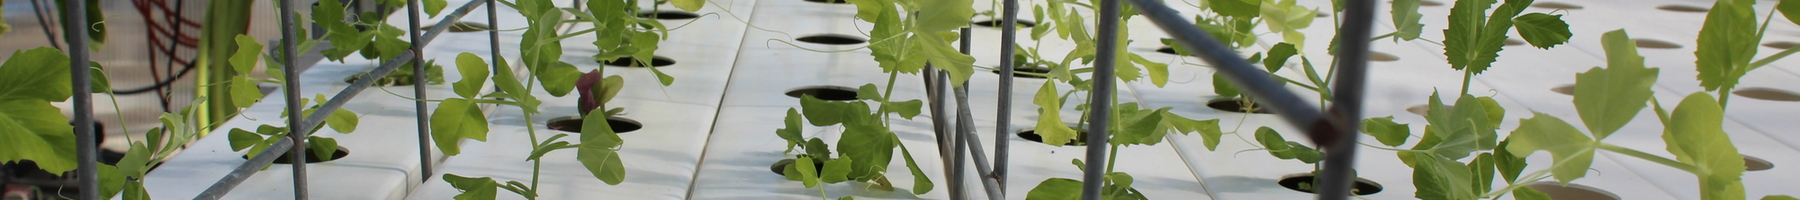 Pea sprouts on a table, each sprout its own circle of dirt, plus a trellis to climb